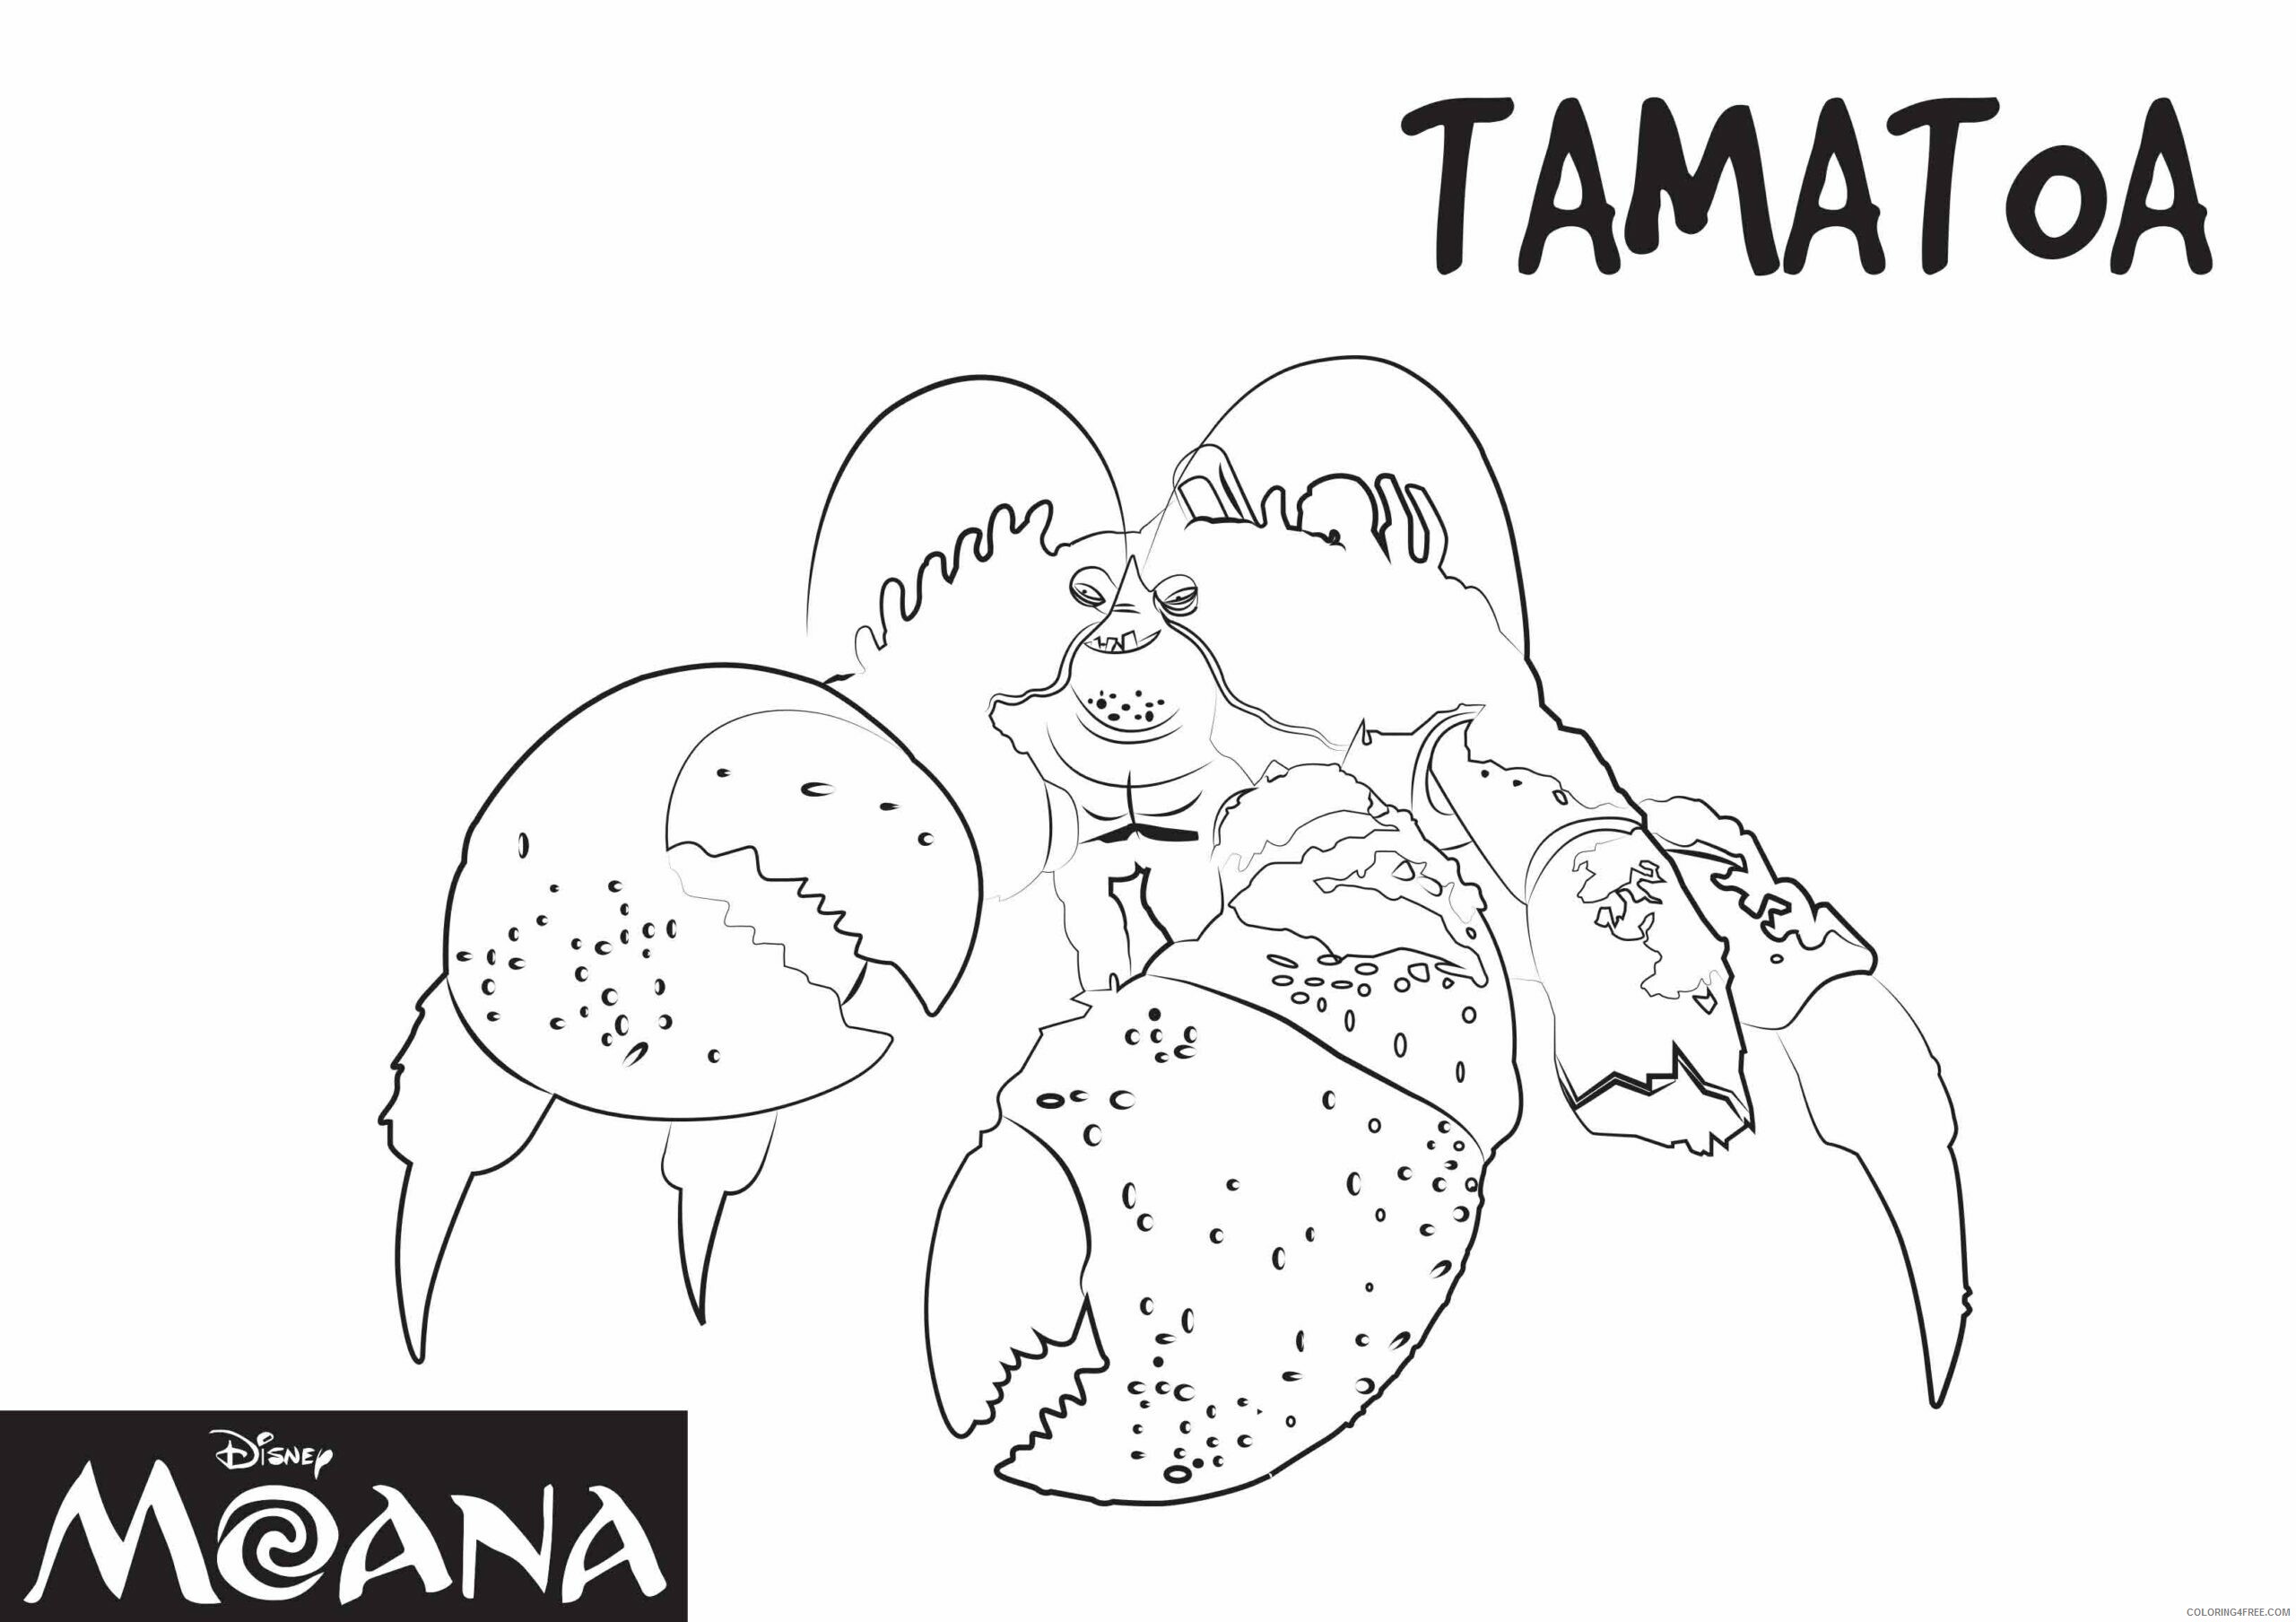 Vaiana Moana Coloring Pages TV Film moana_coloring_page4 Printable 2020 11072 Coloring4free